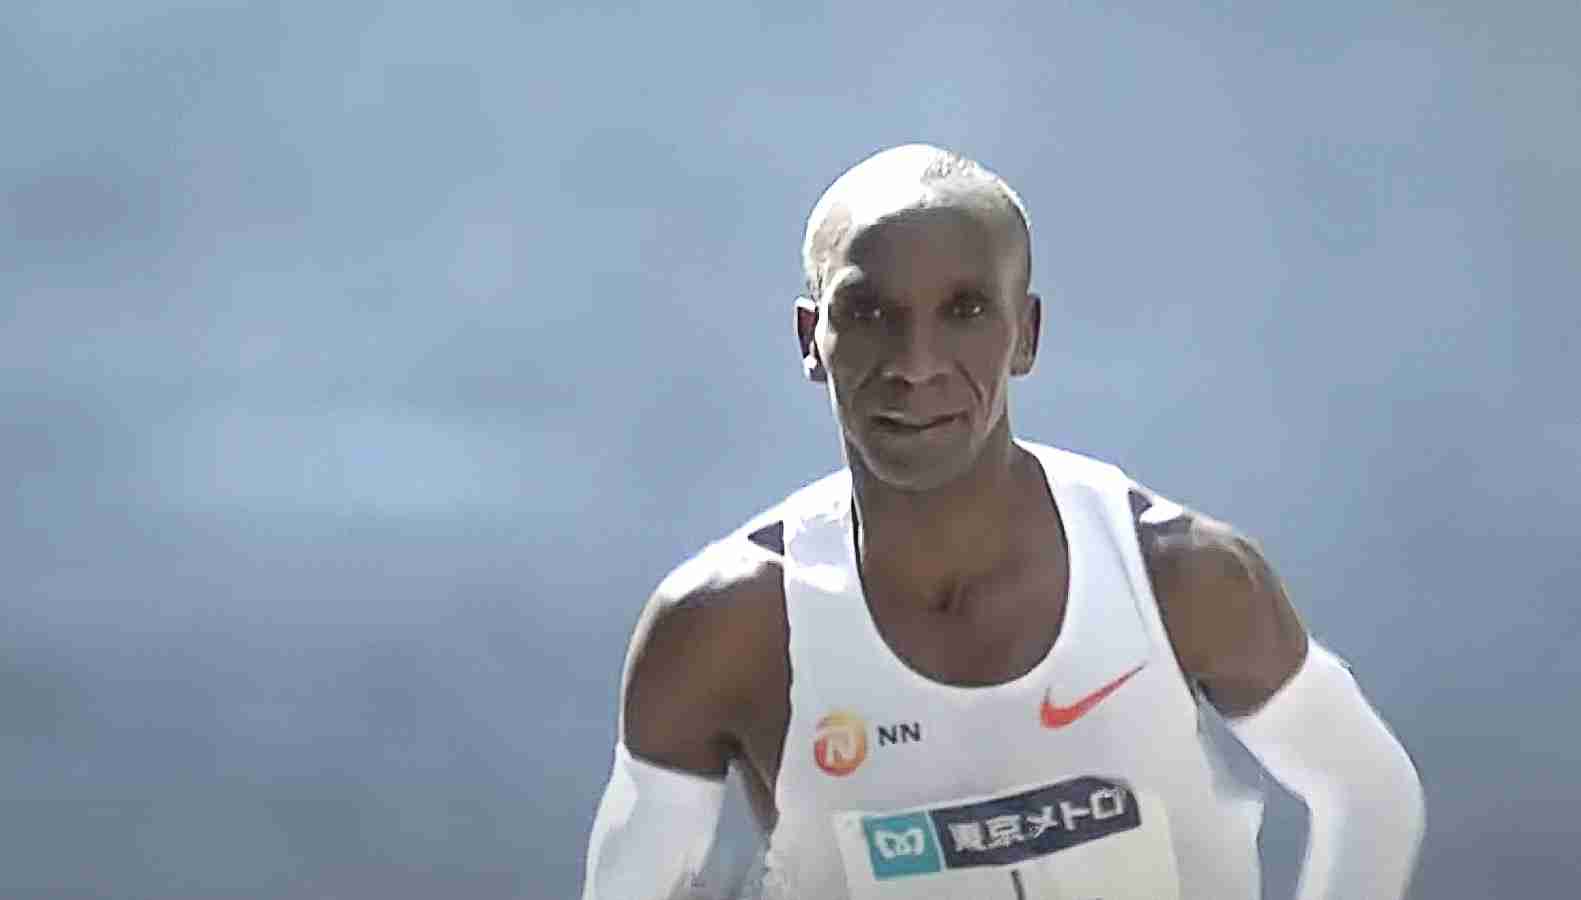 Results from the 2022 Tokyo Marathon; record times by Kipchoge, Kosgei